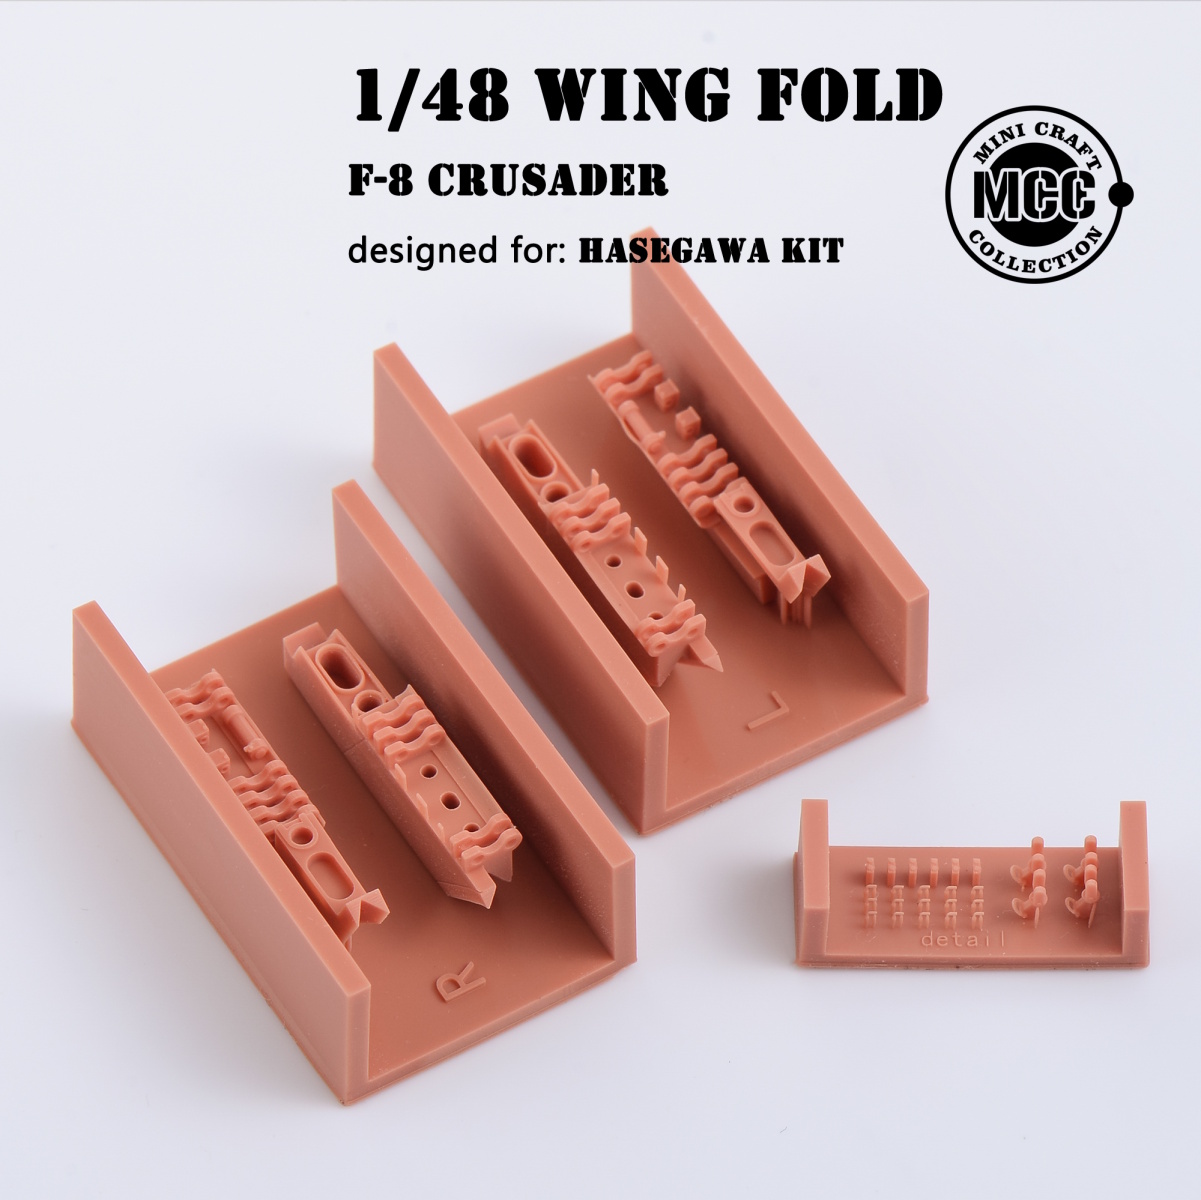 1/48 Folding wings for F-8 Crusader